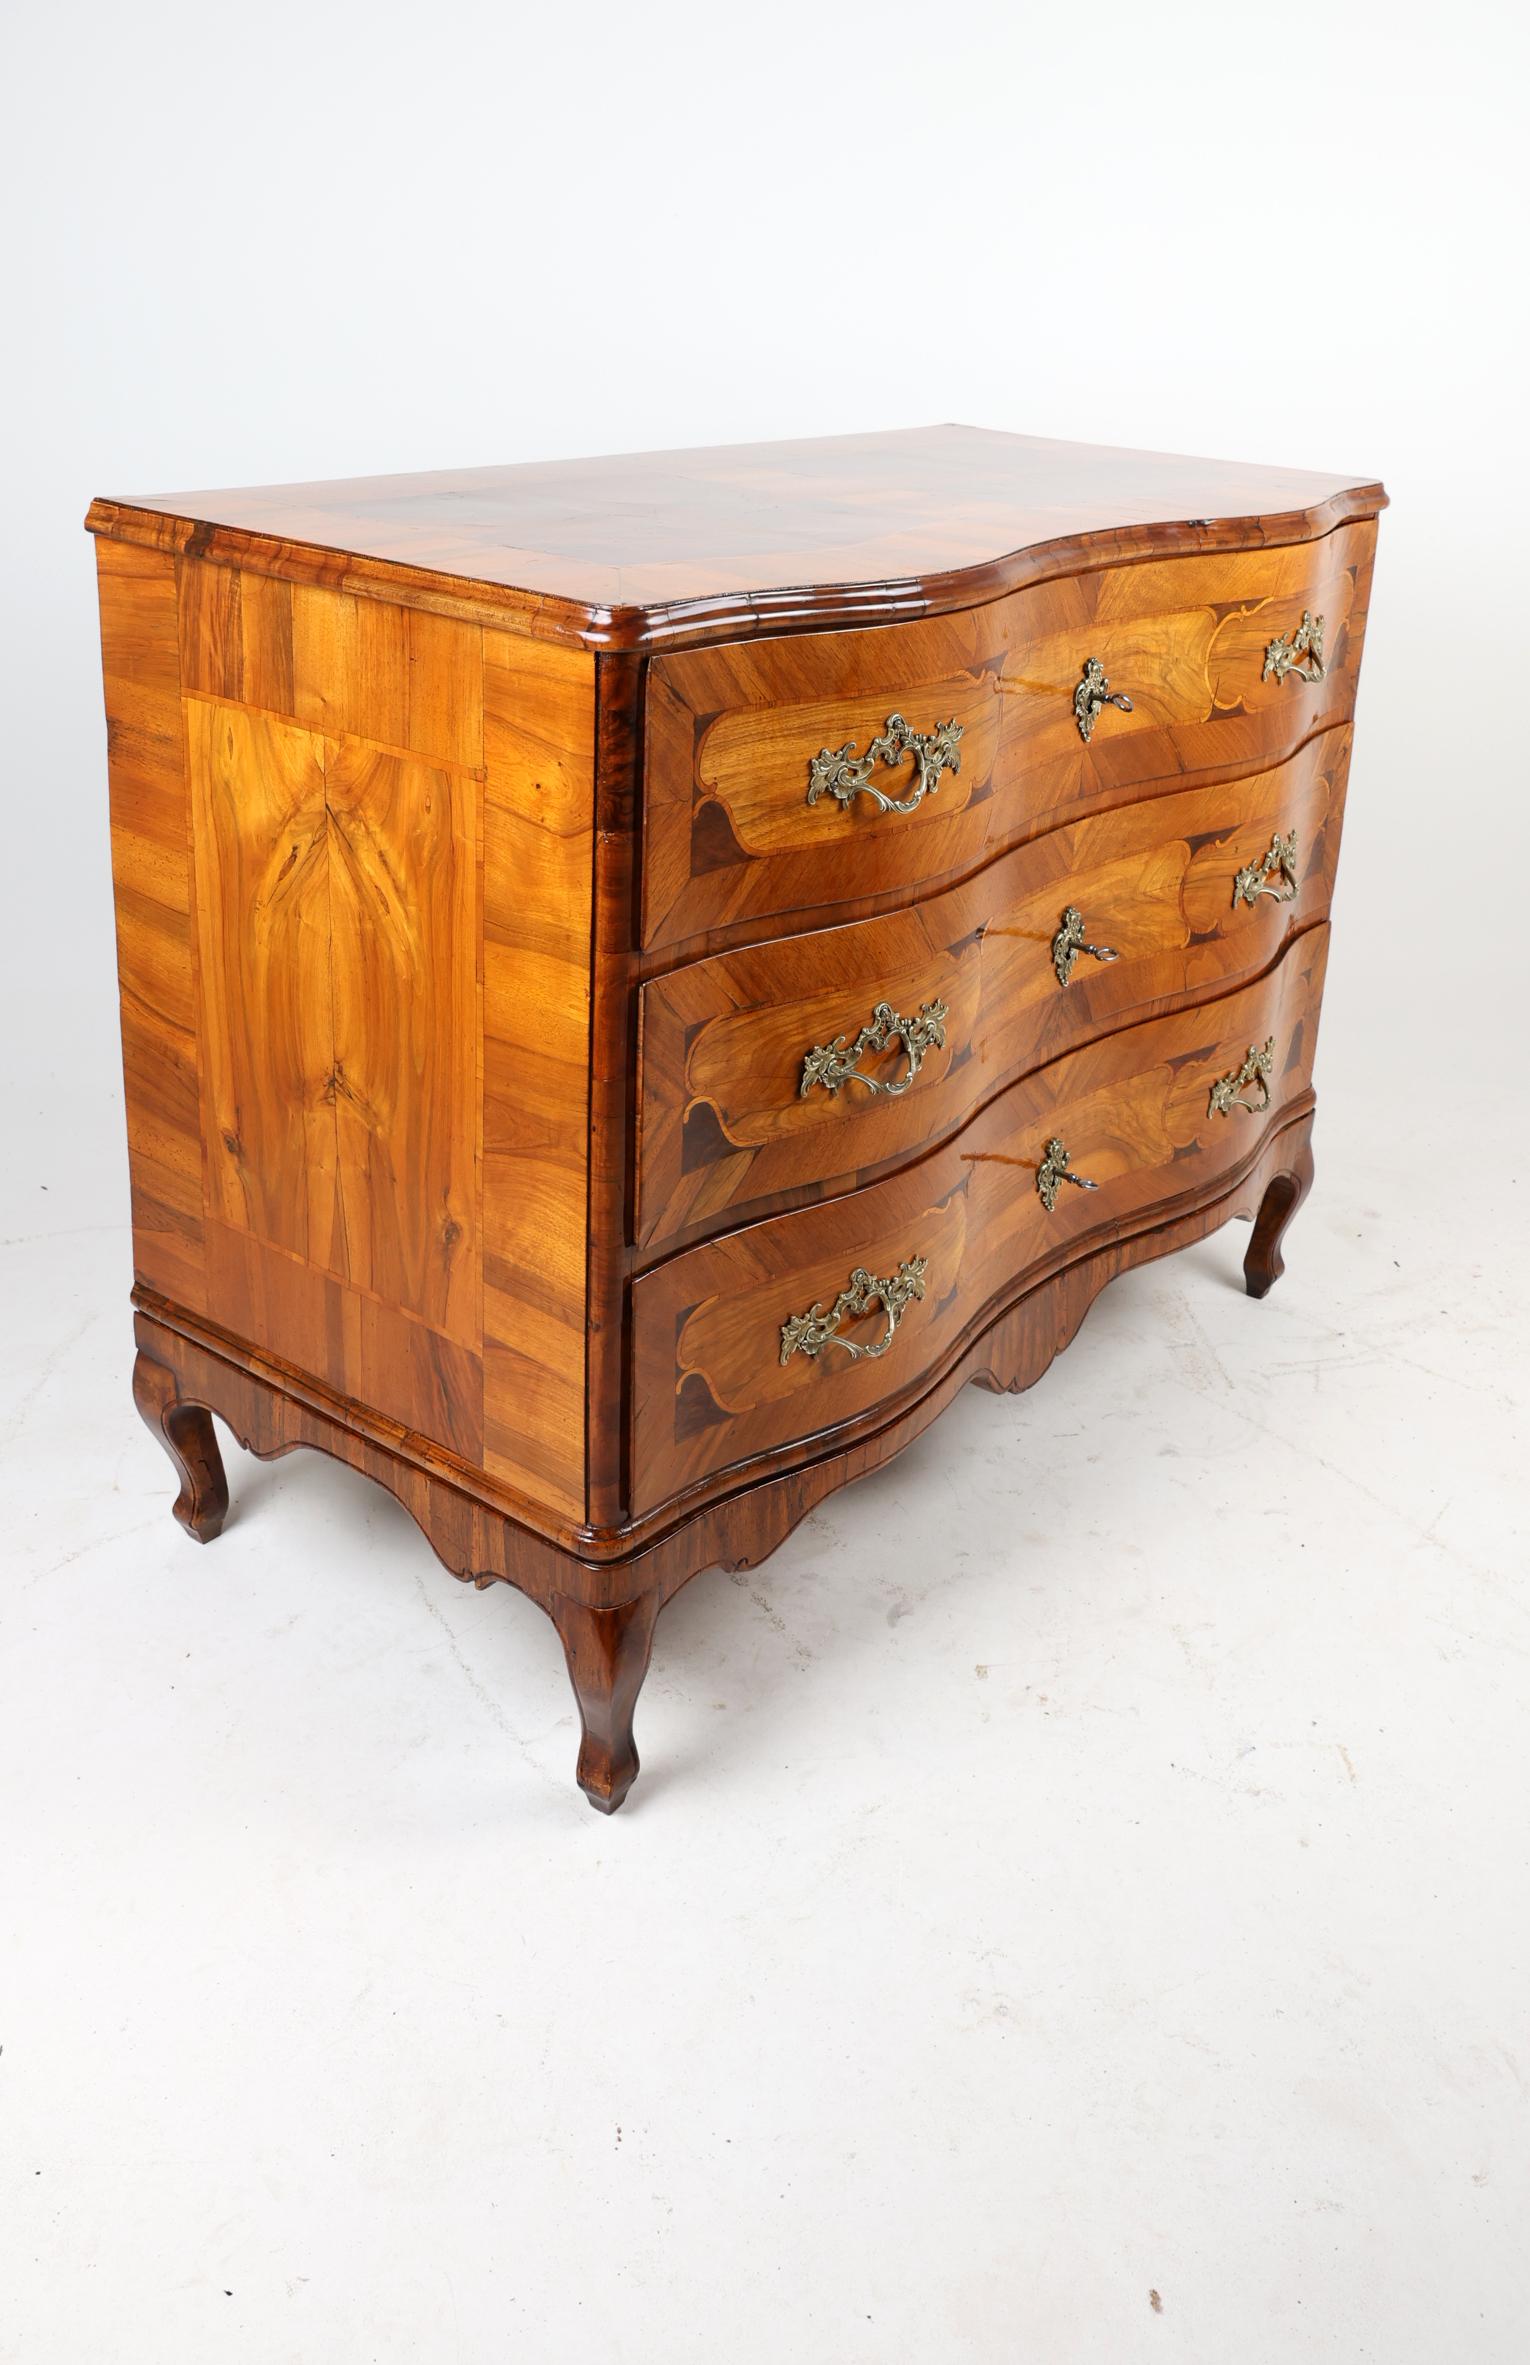 Late 18th Century Baroque Commode with Burl Walnut For Sale 4